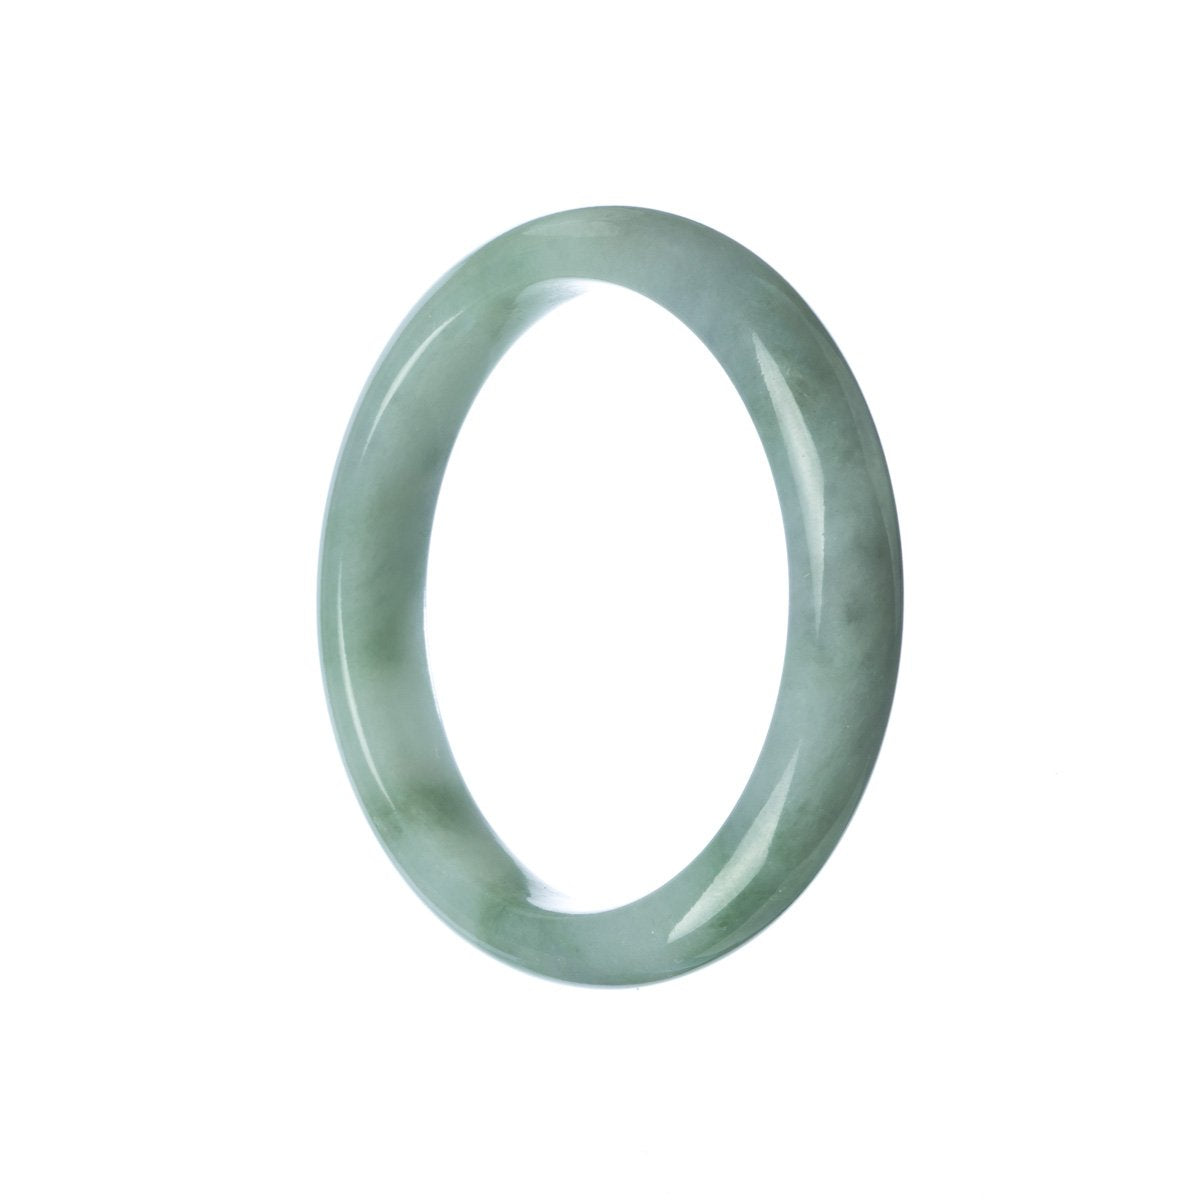 A grey traditional jade bracelet with a half moon design, measuring 55mm, certified as untreated. Made by MAYS™.